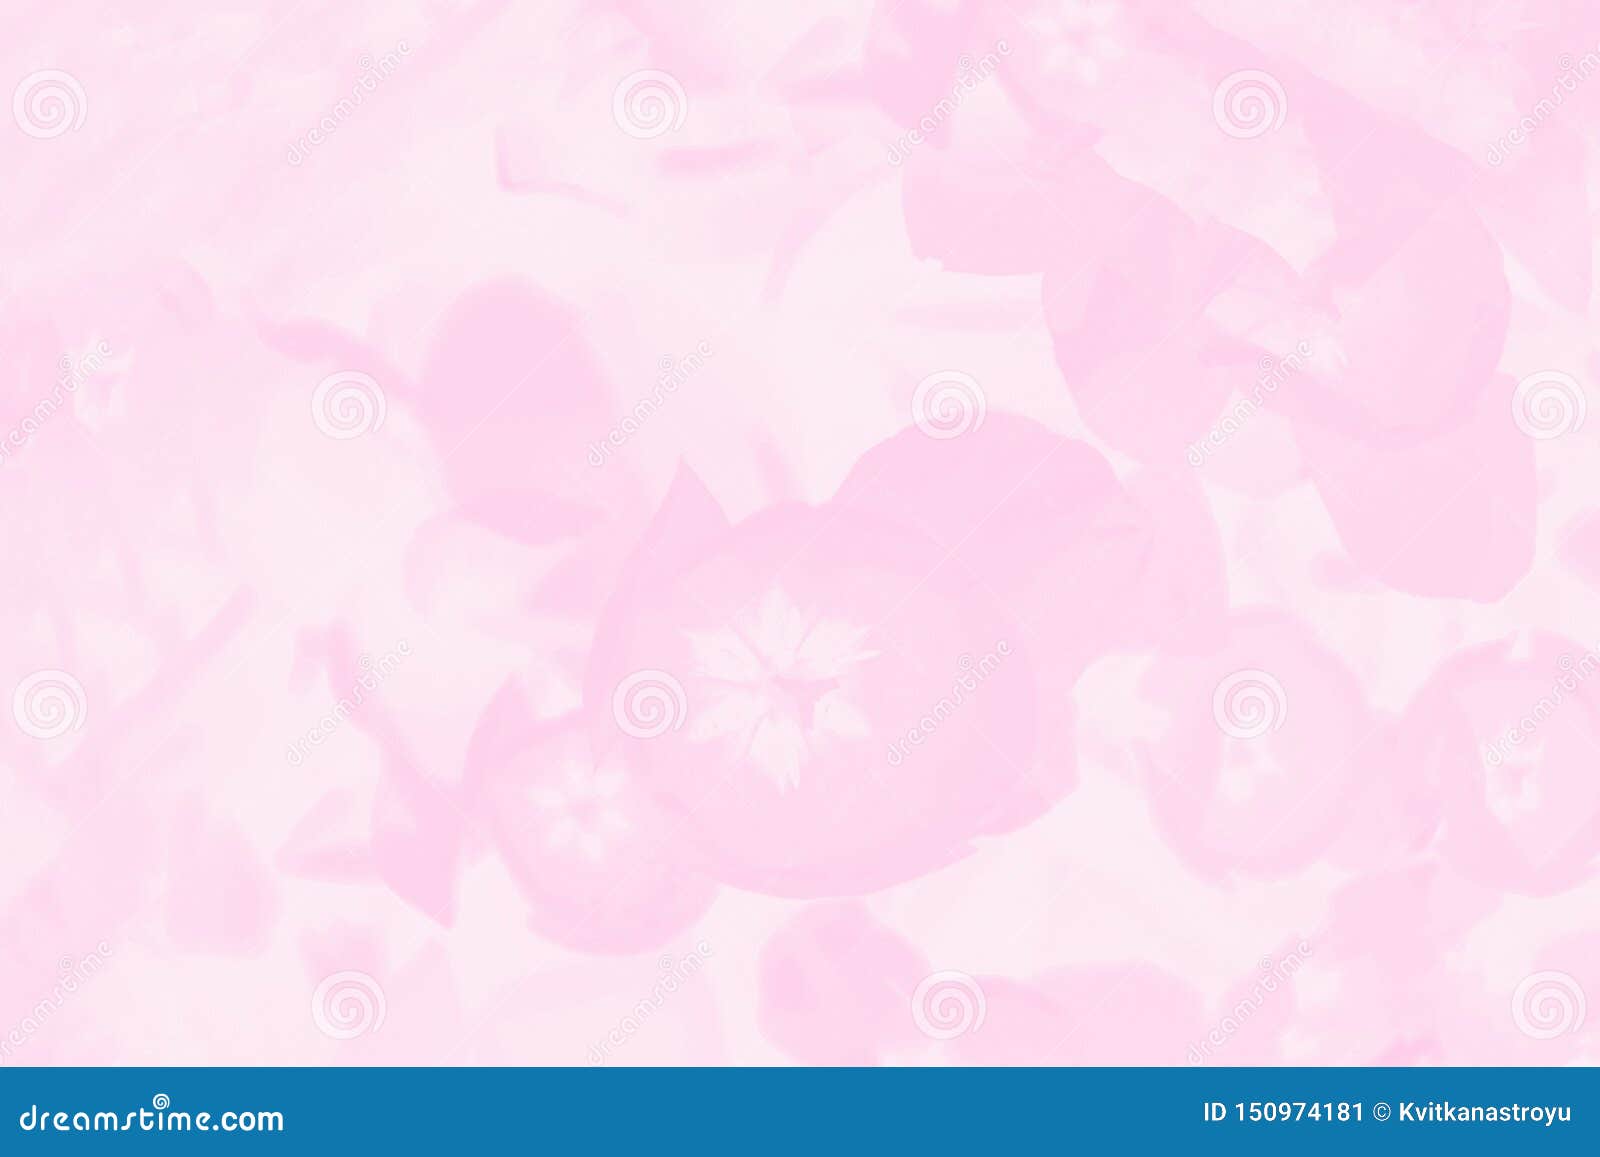 Light Pink Gradient Color Background With Delicate Floral Pattern